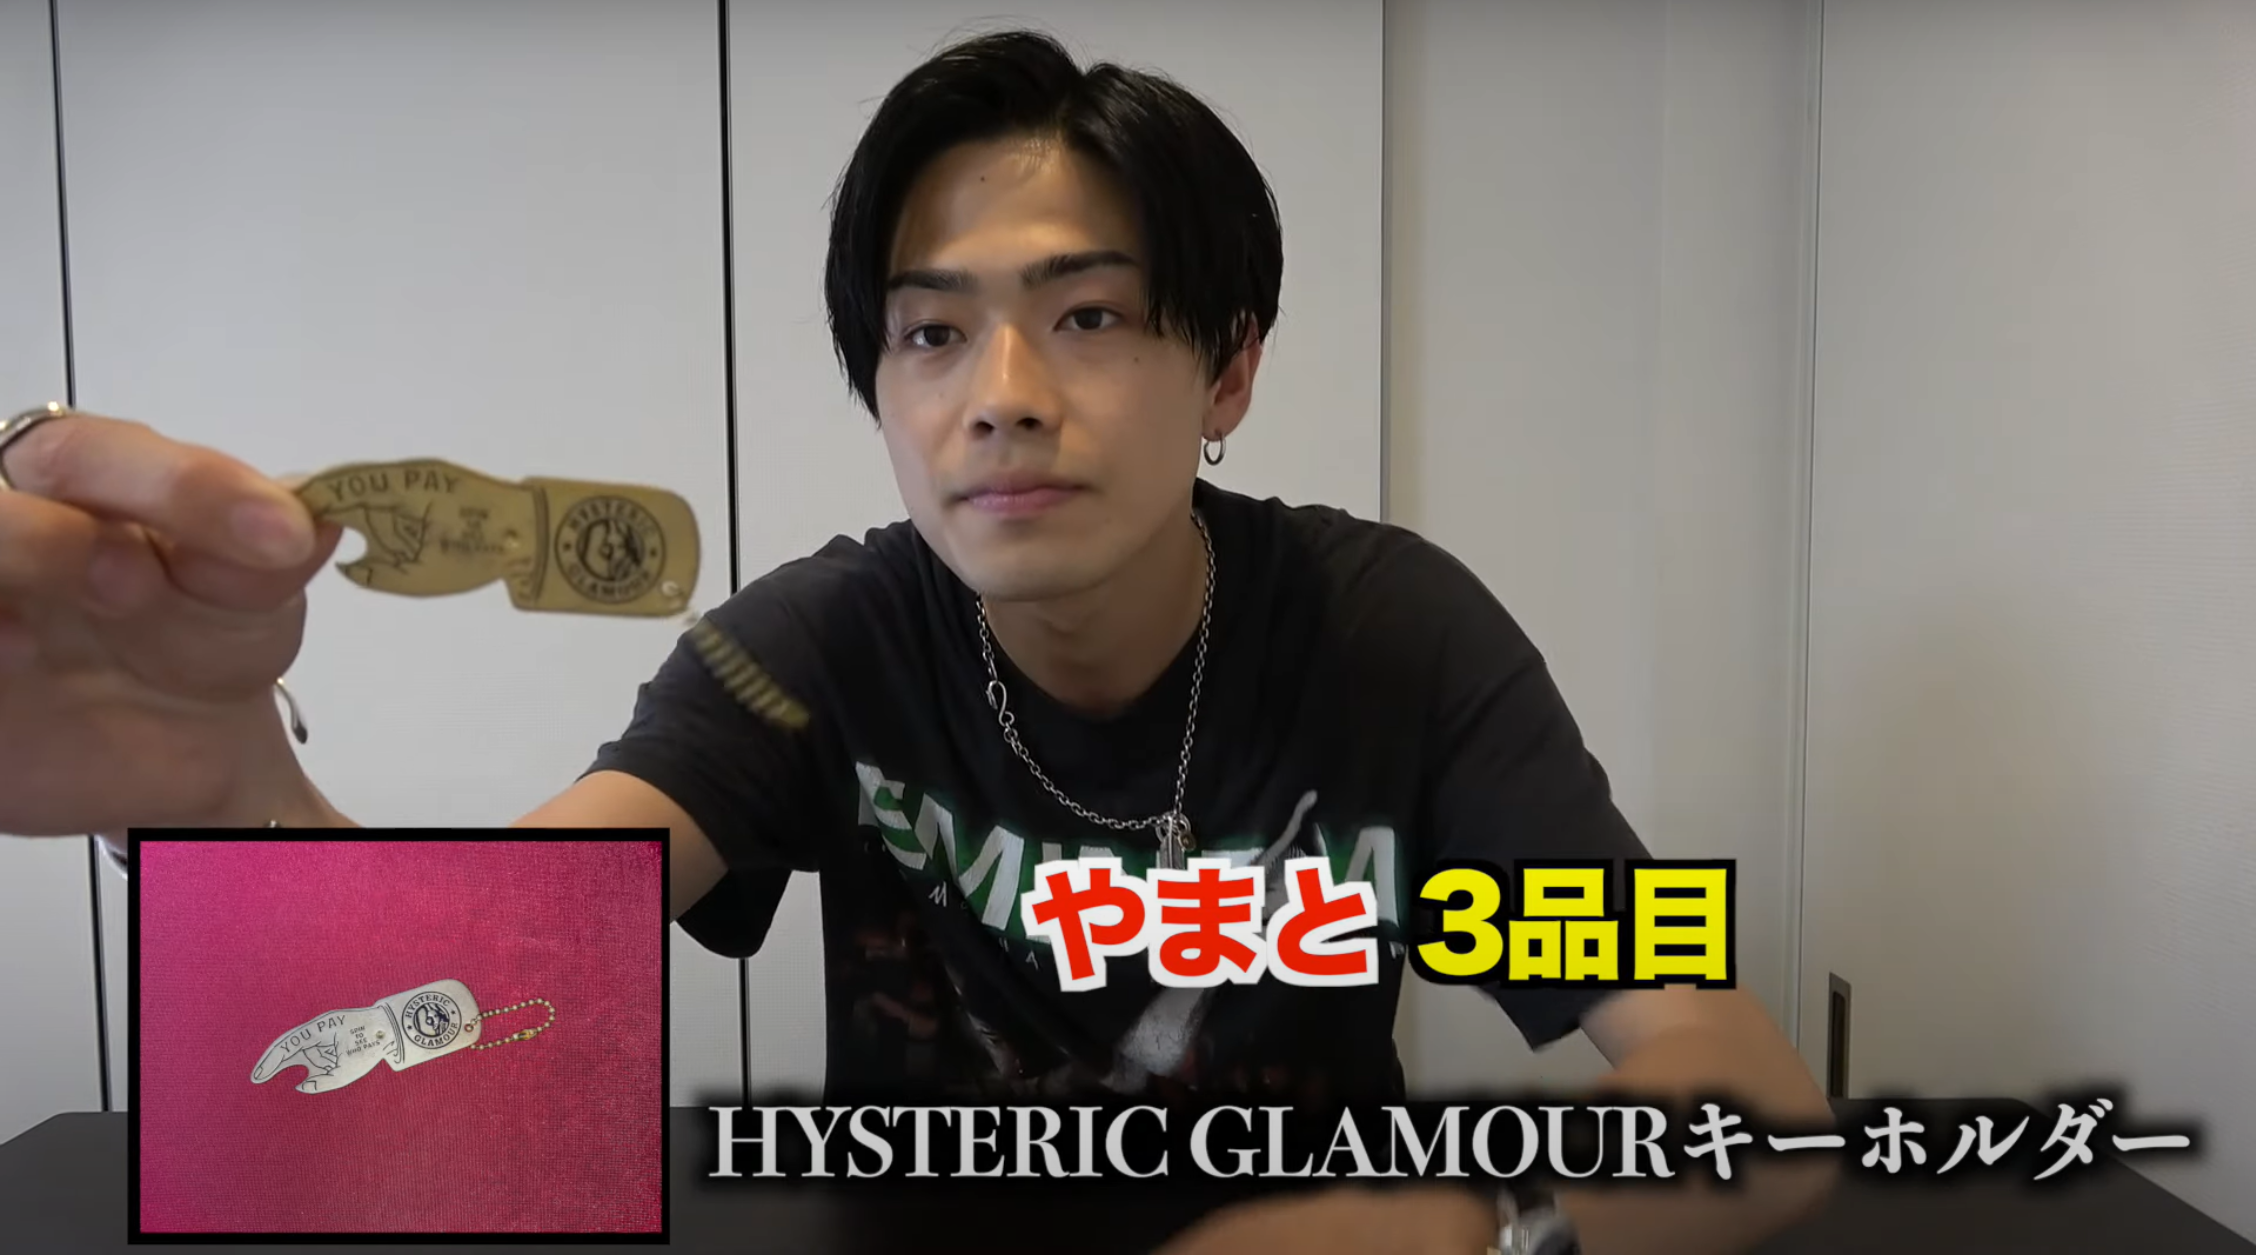 HYSTERIC GLAMOUR YOU PAY キーホルダー】コムドットやまとが購入した ...